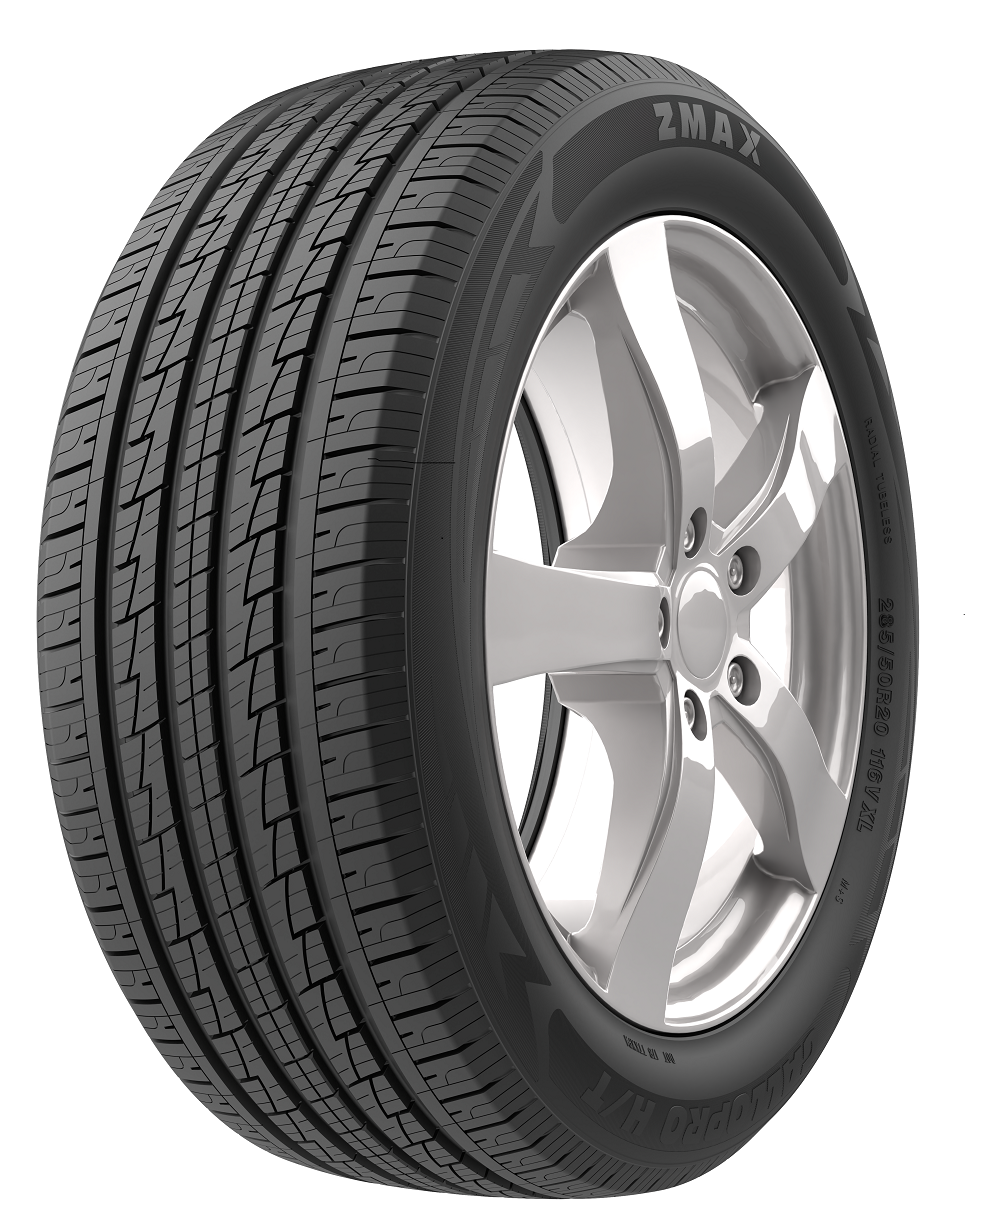 275/70 R16 114T ZMAX GALLOPRO H/T HT